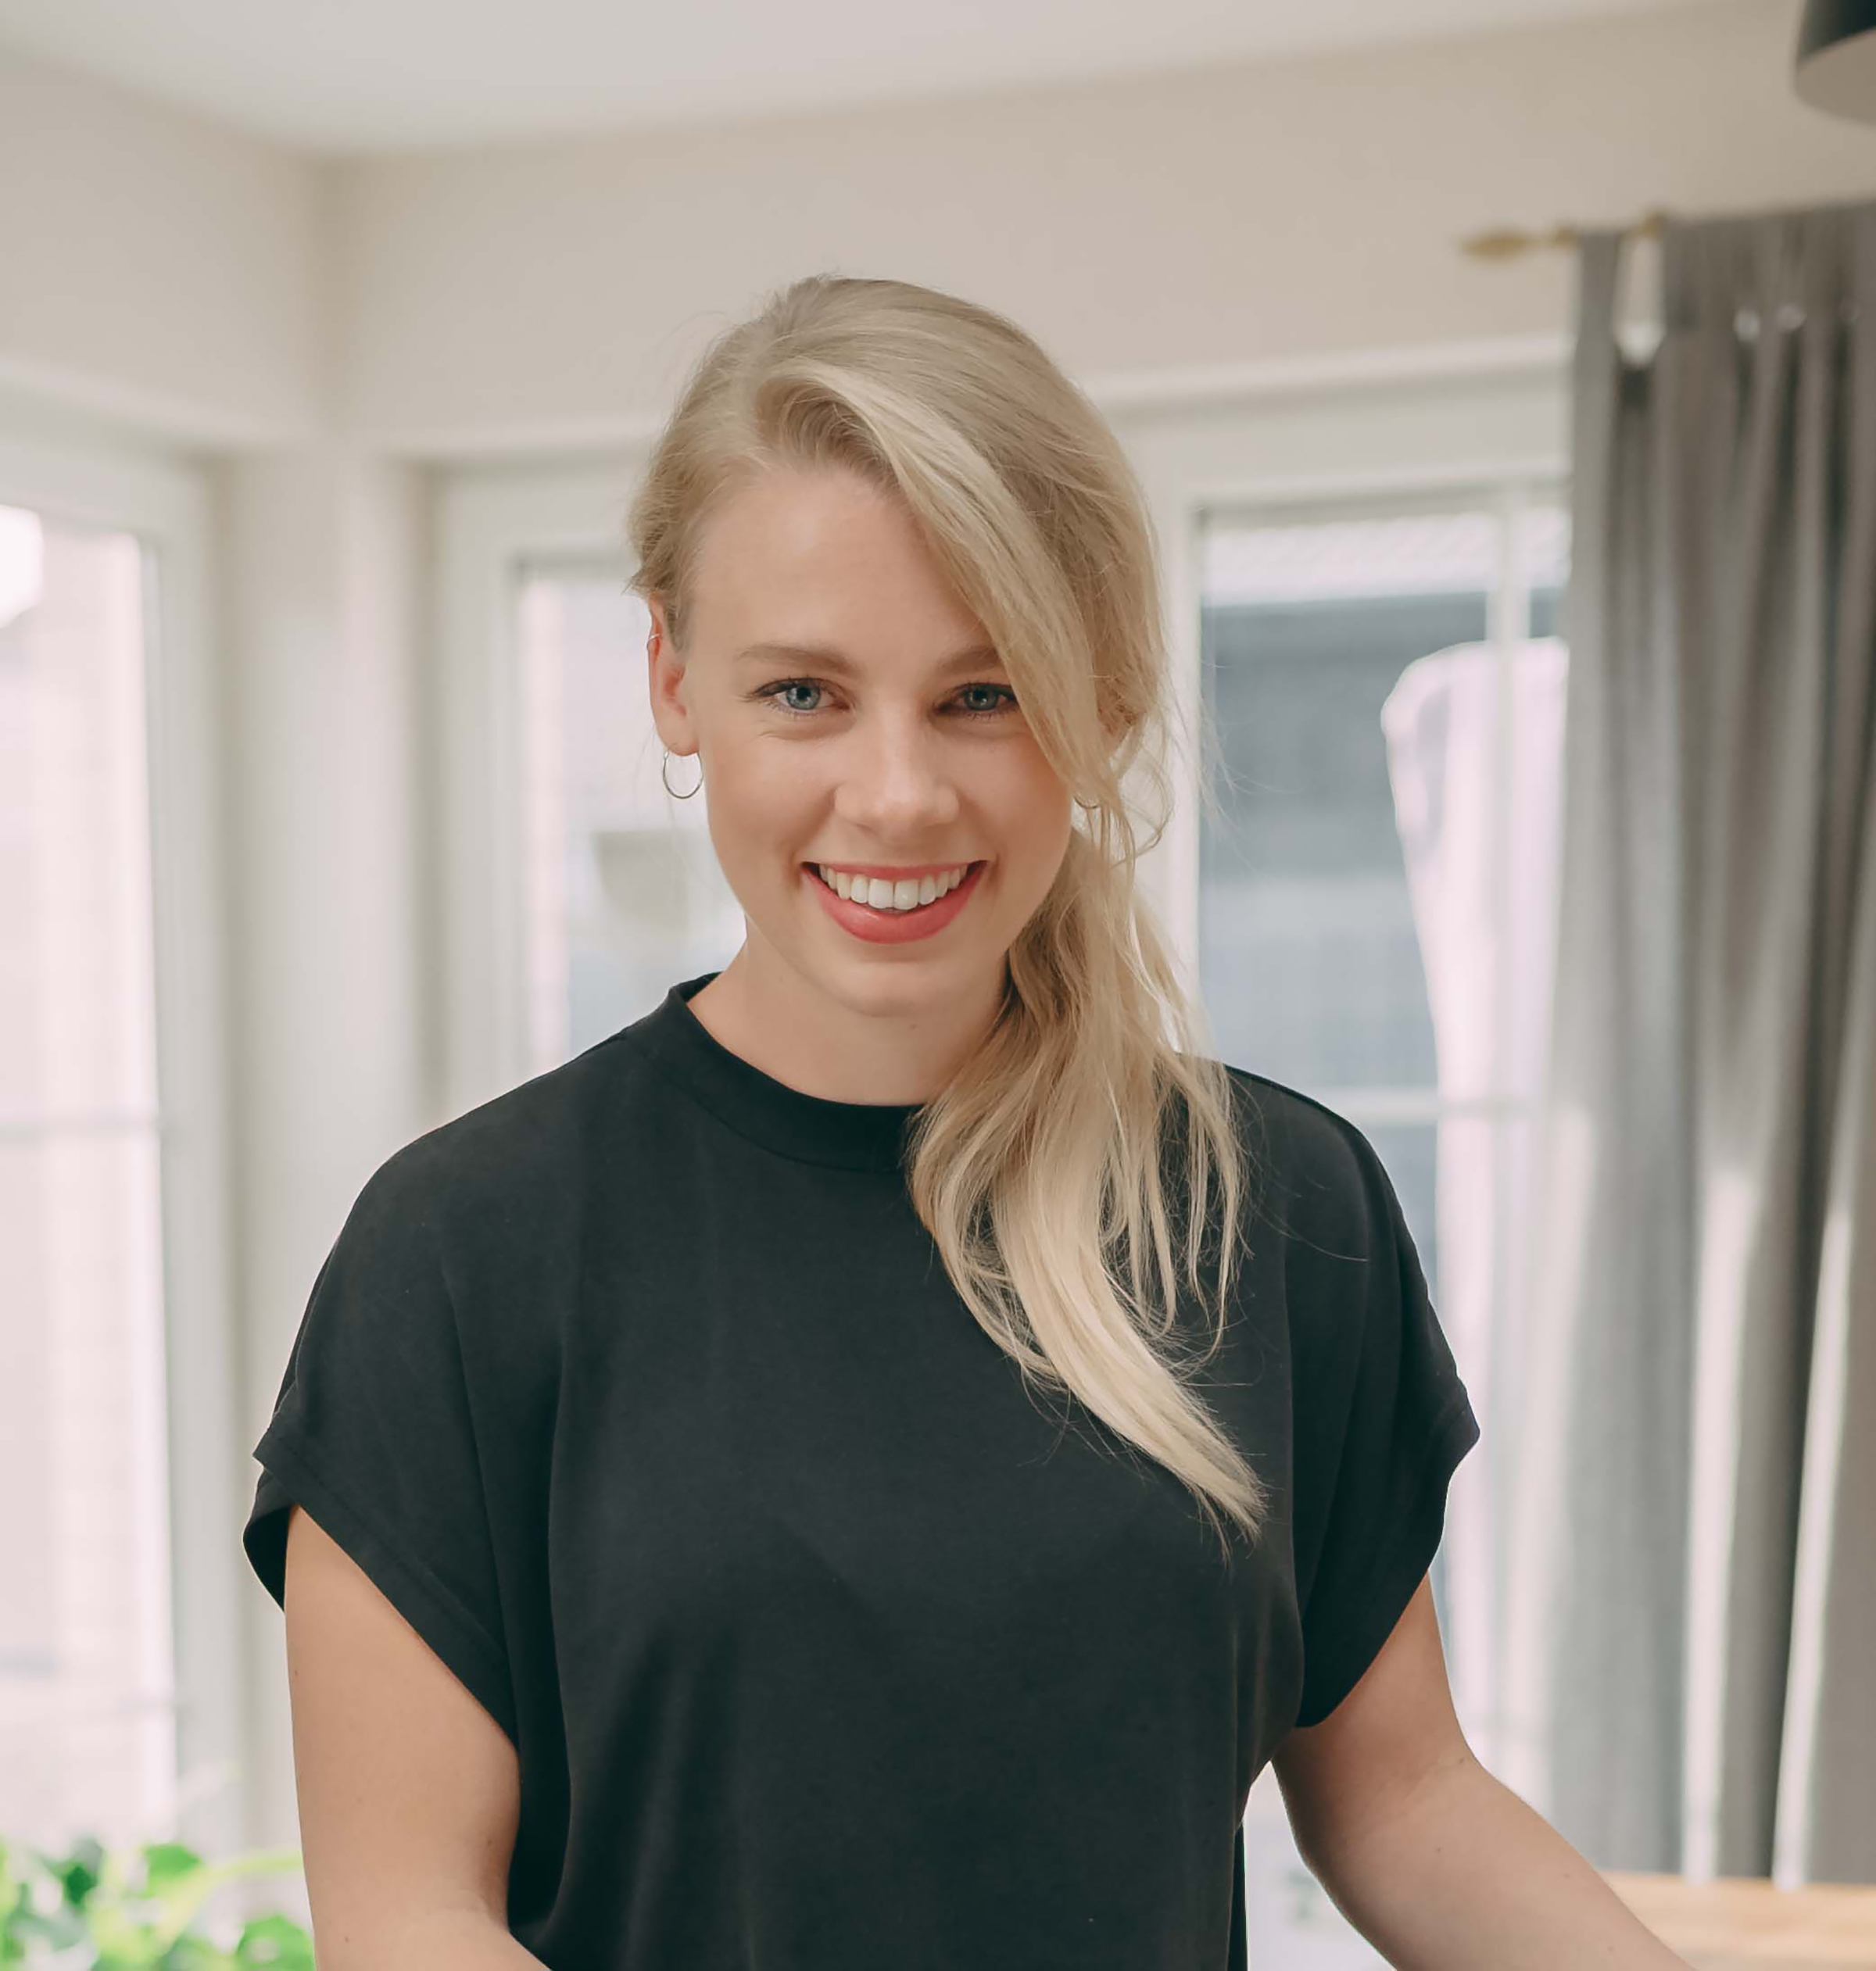 Woman with blonde ponytail and black t-shirt, smiling